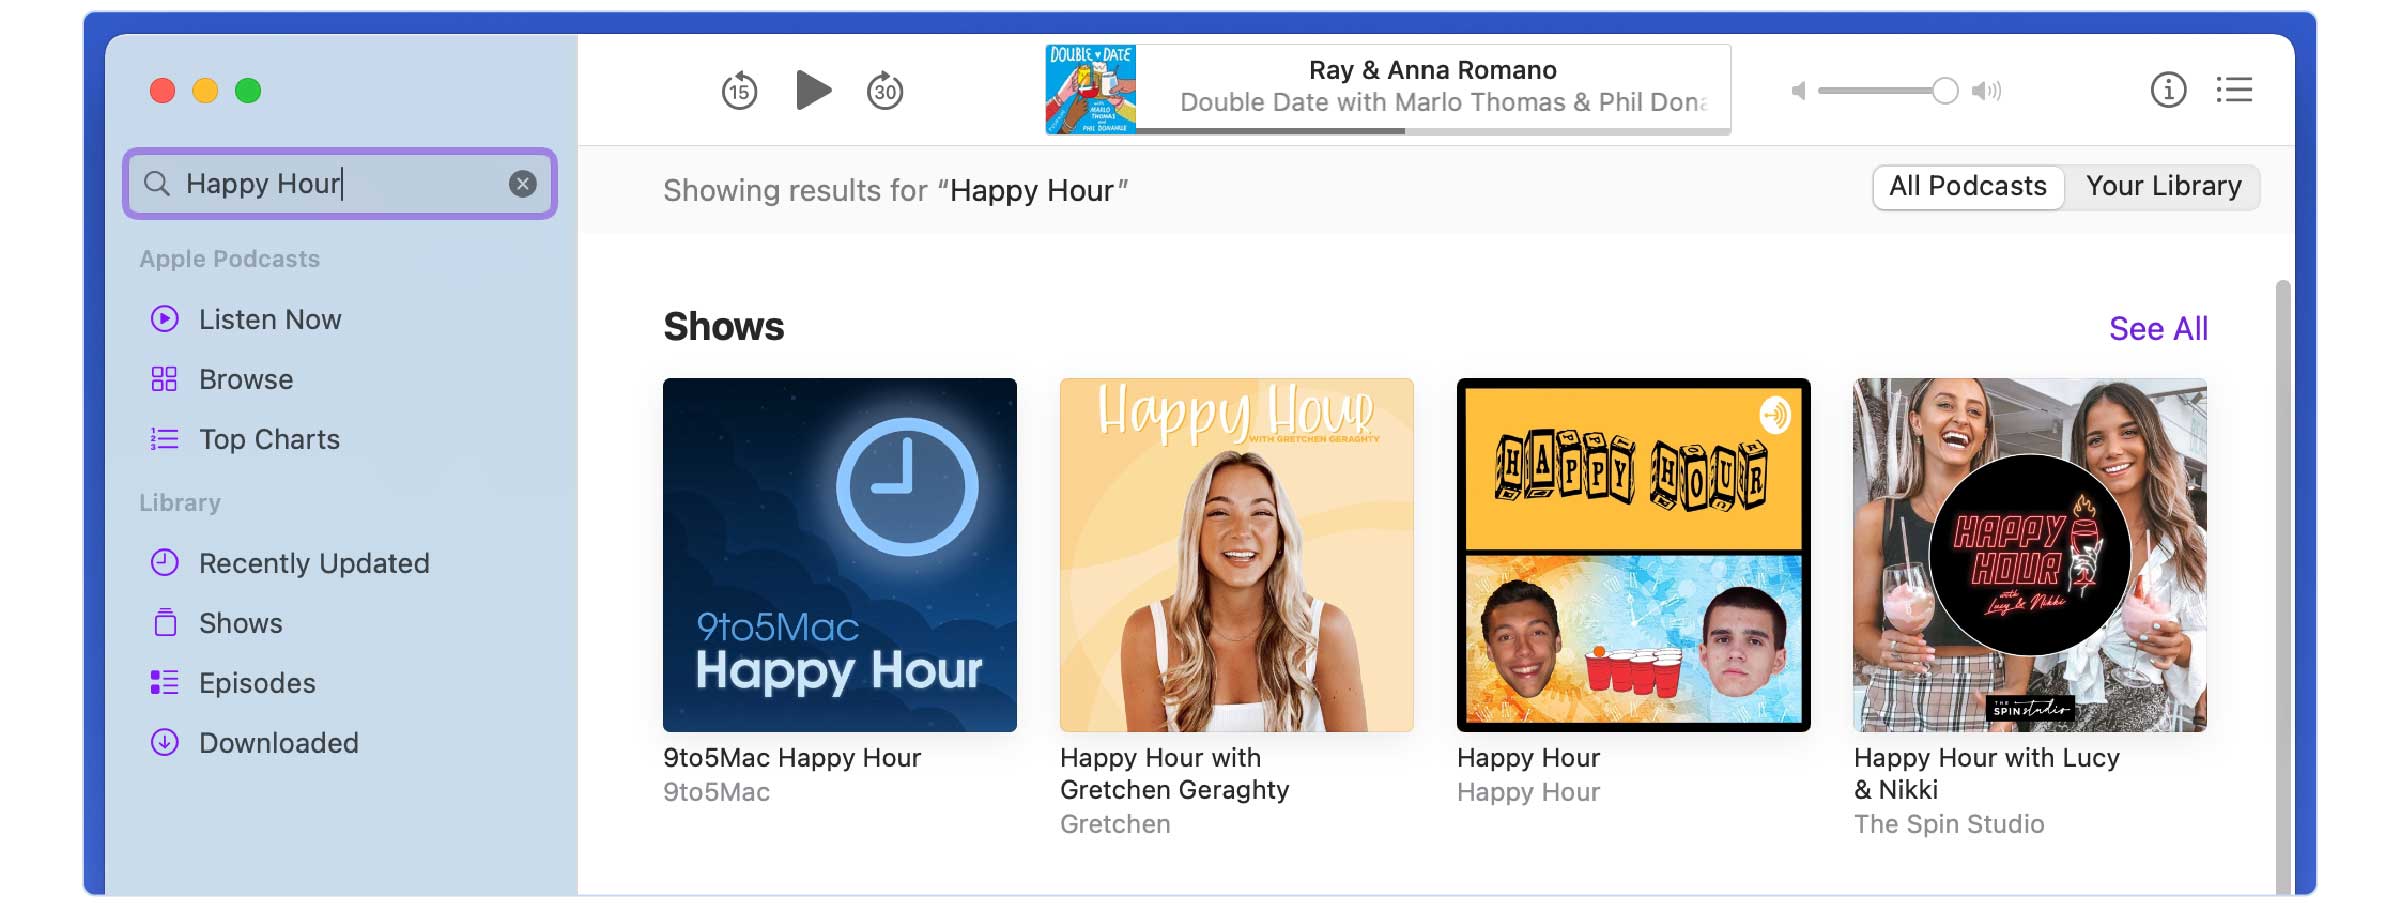 Screenshot of a search inside Apple Podcasts for the podcast name 'happy hour' displaying 4 results of podcasts with the name 'happy hour' or similar